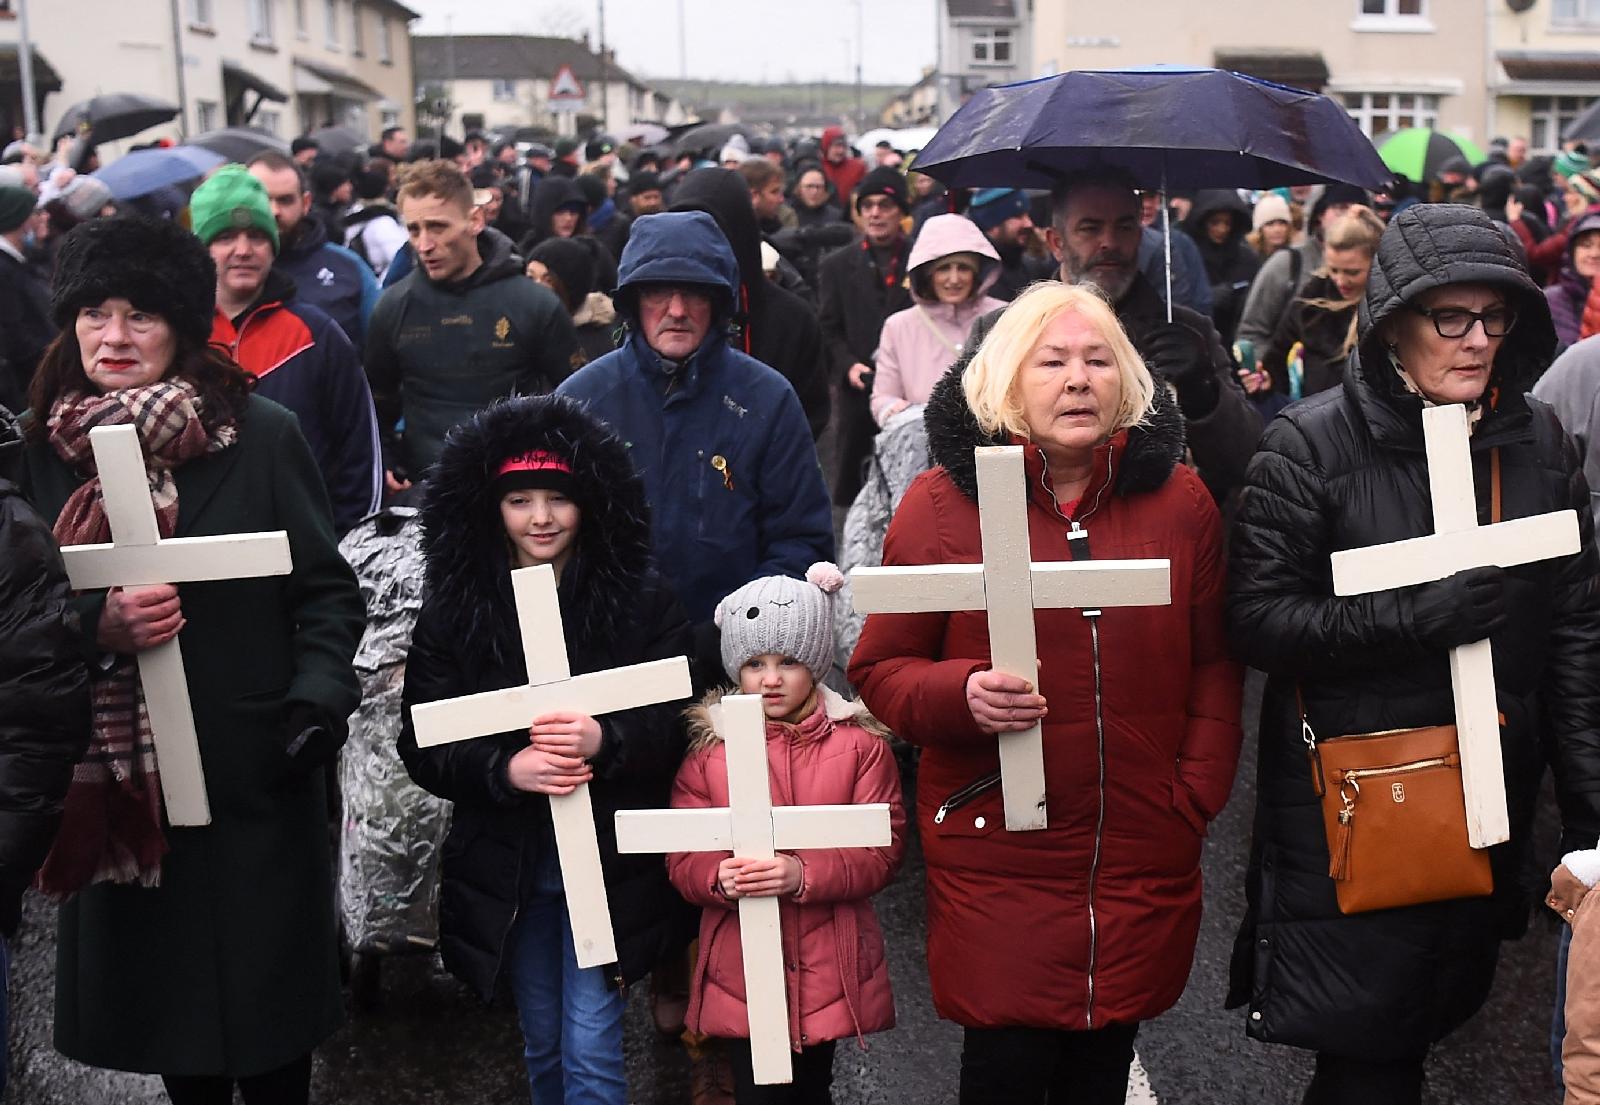 Church leaders join commemorations of Bloody Sunday